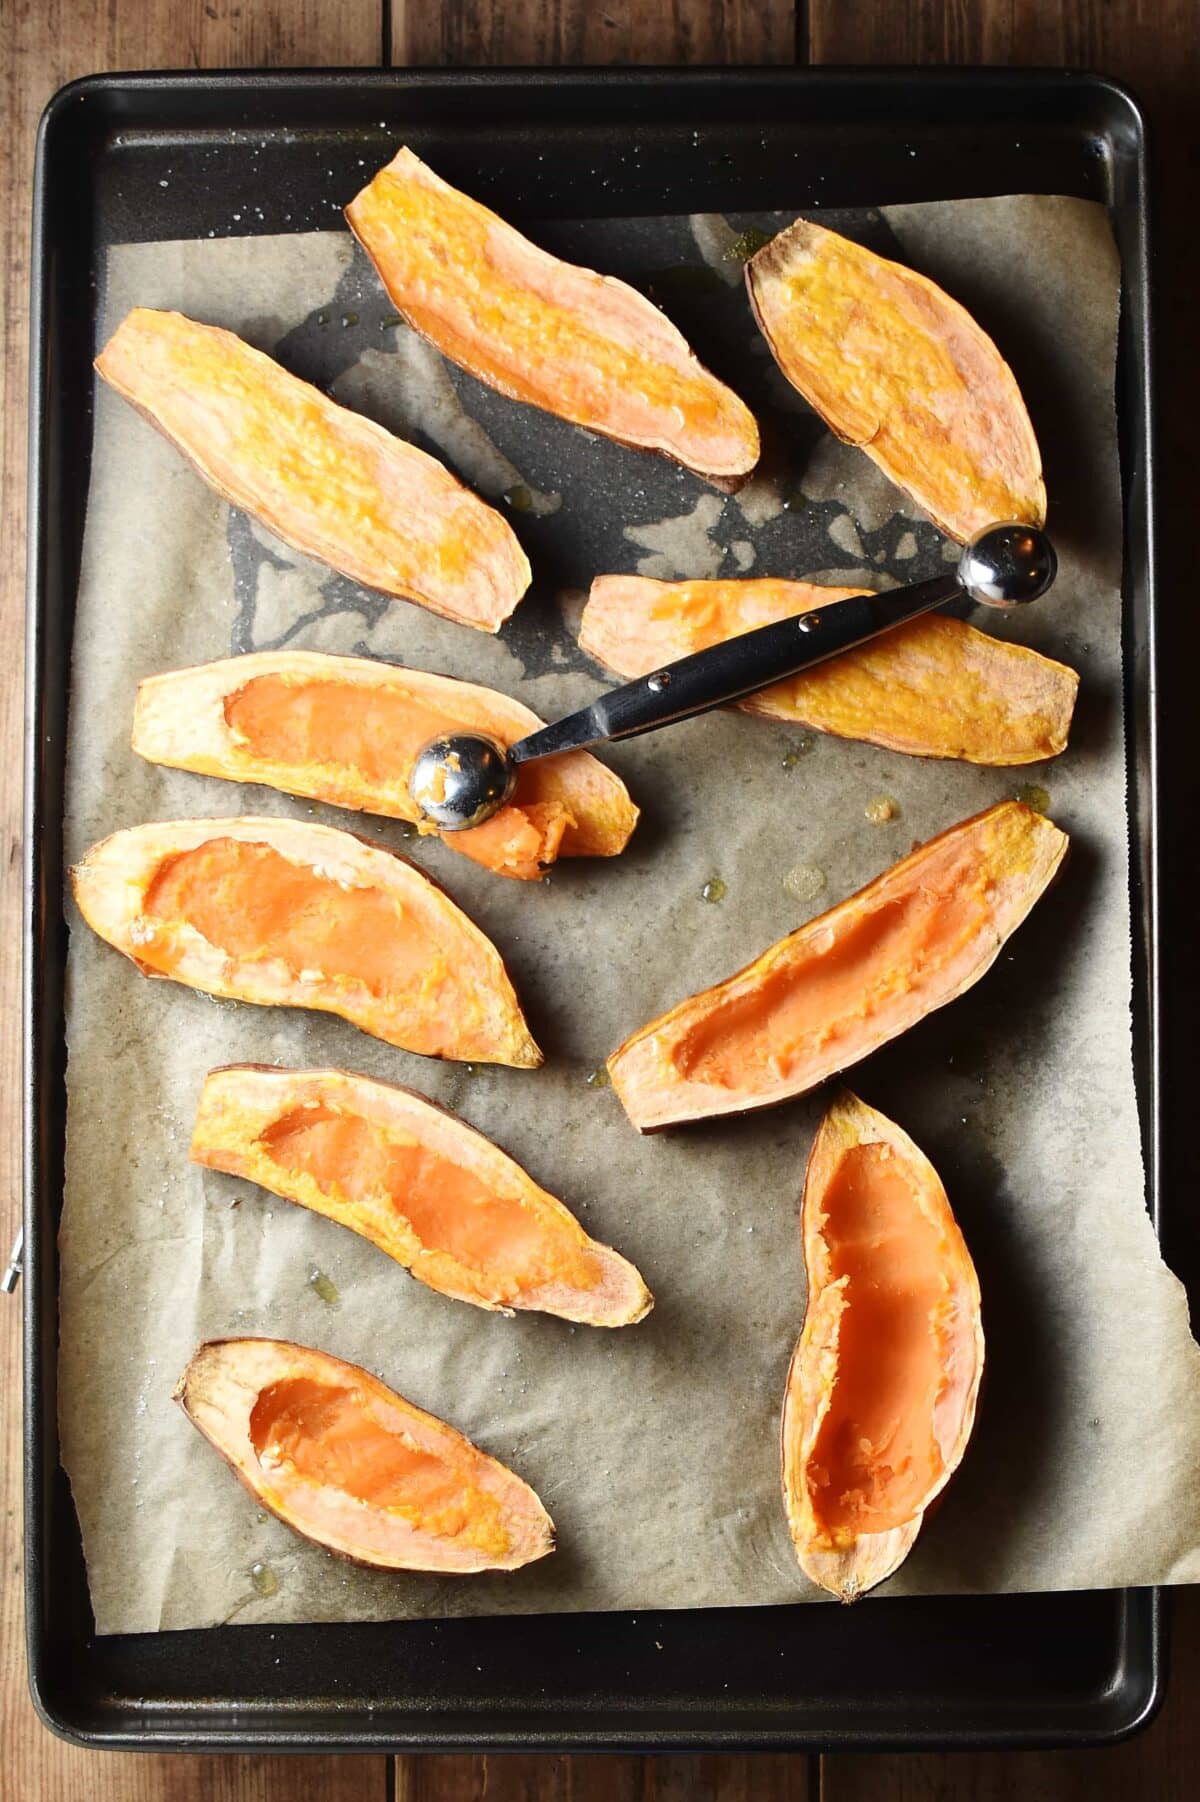 Sweet potato halves with melon baller on top of baking tray lined with paper.